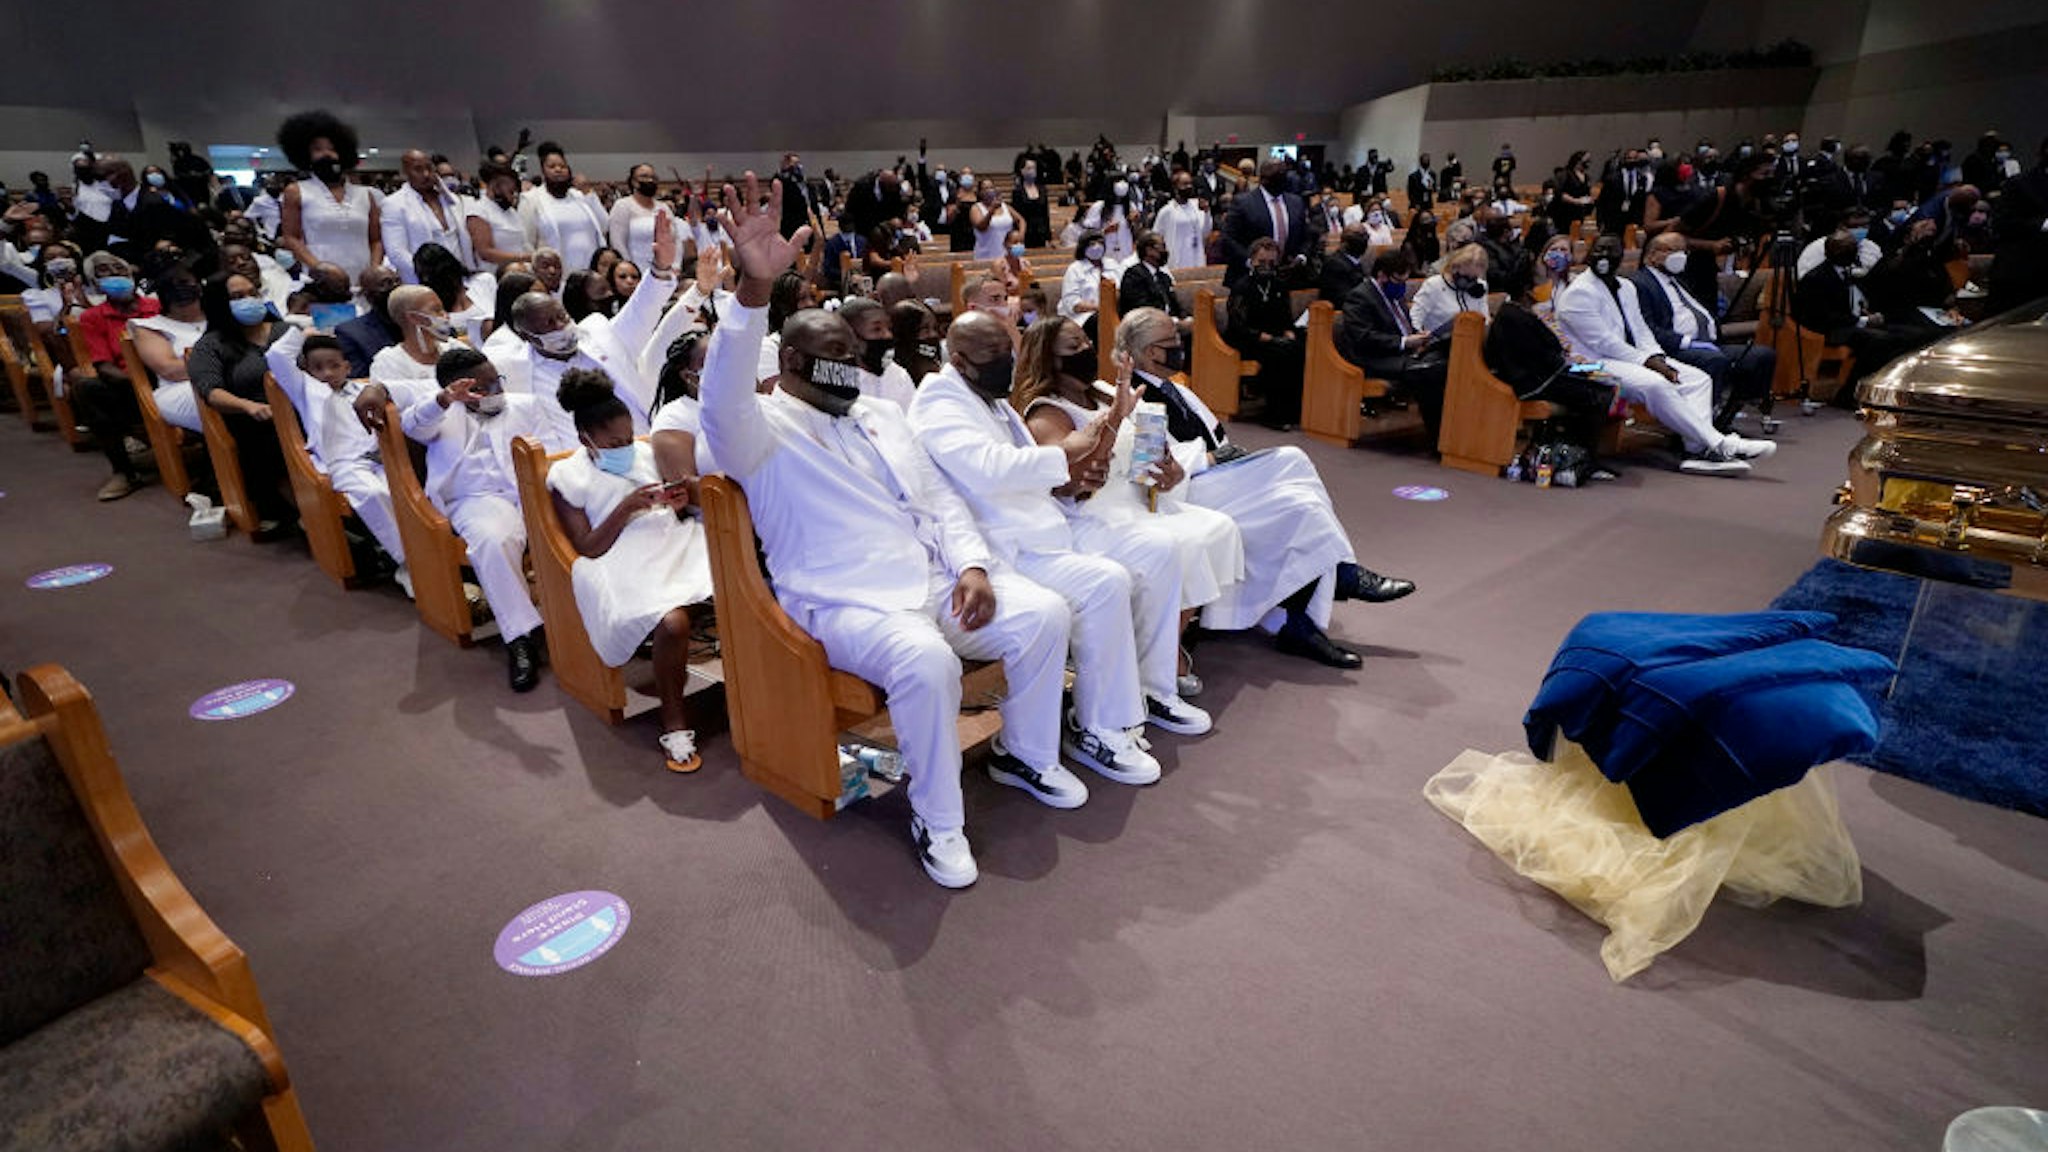 Family and friends attend the funeral service for George Floyd in the chapel at the Fountain of Praise church June 9, 2020 in Houston, Texas.